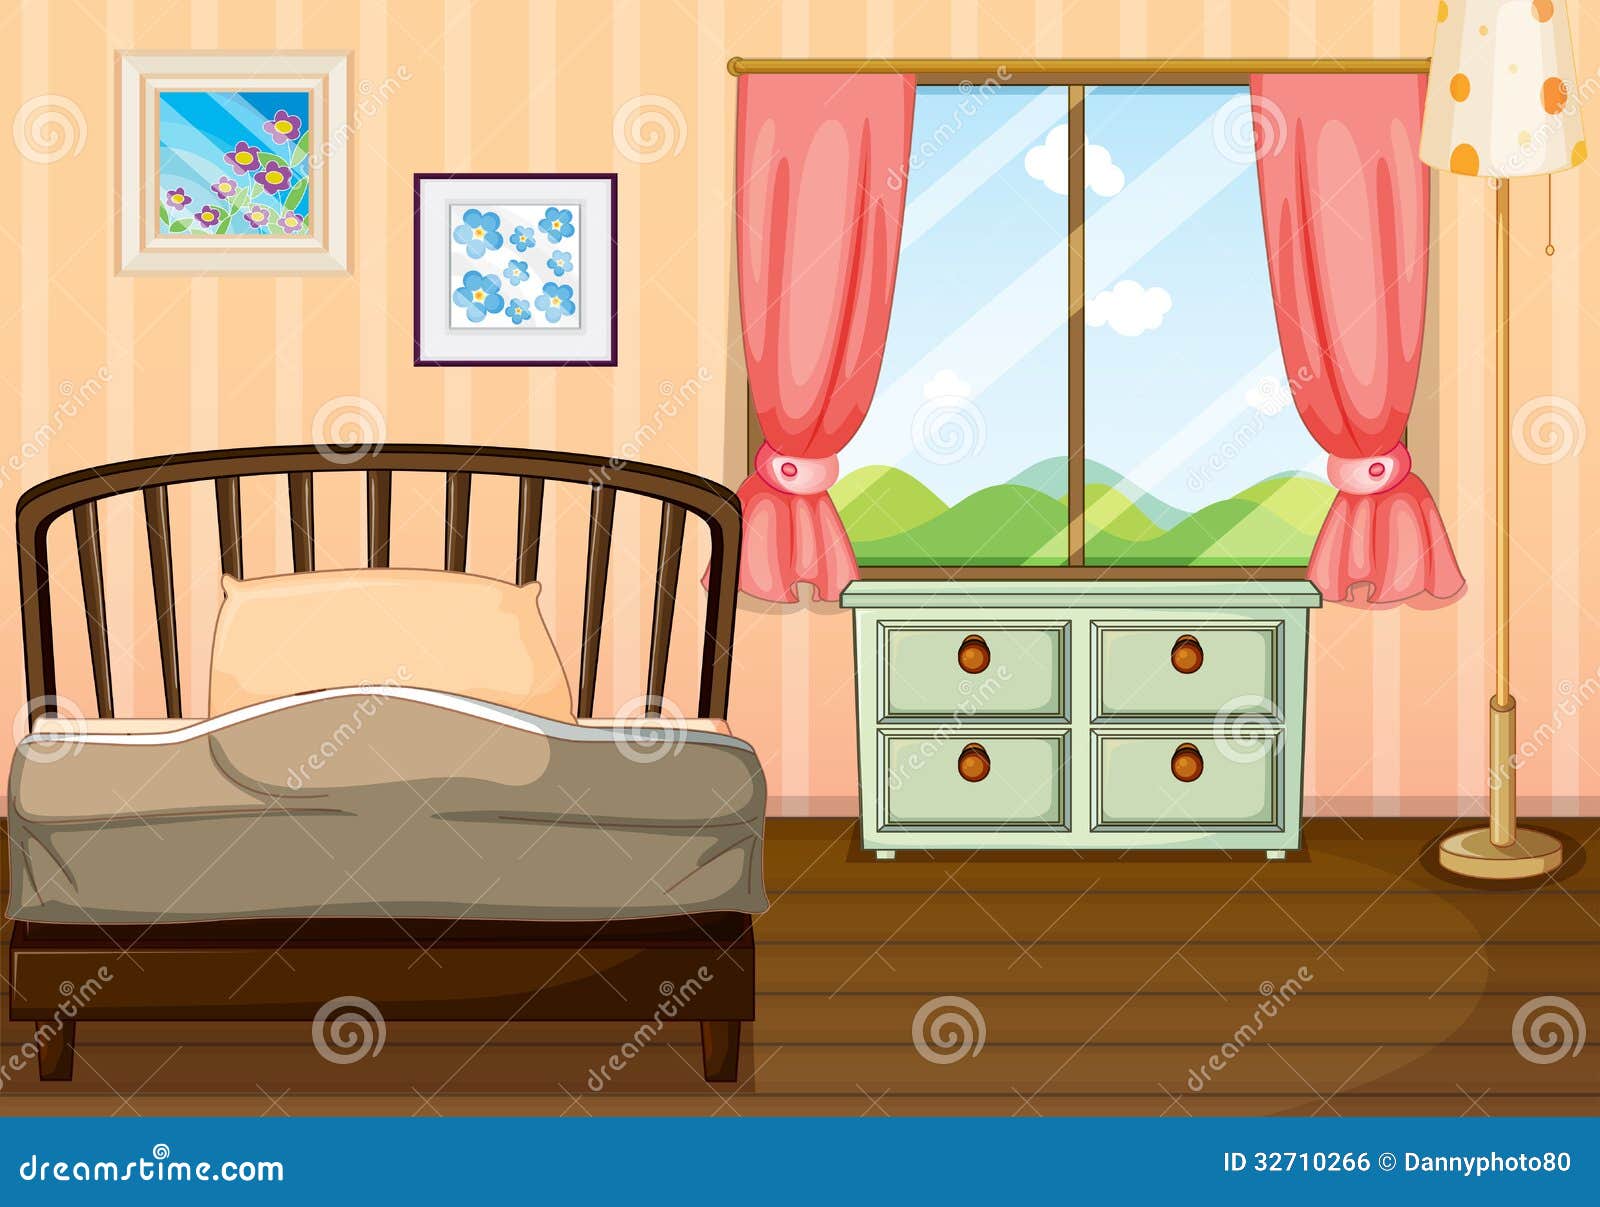 An Empty Bedroom Royalty Free Stock Image - Image: 32710266